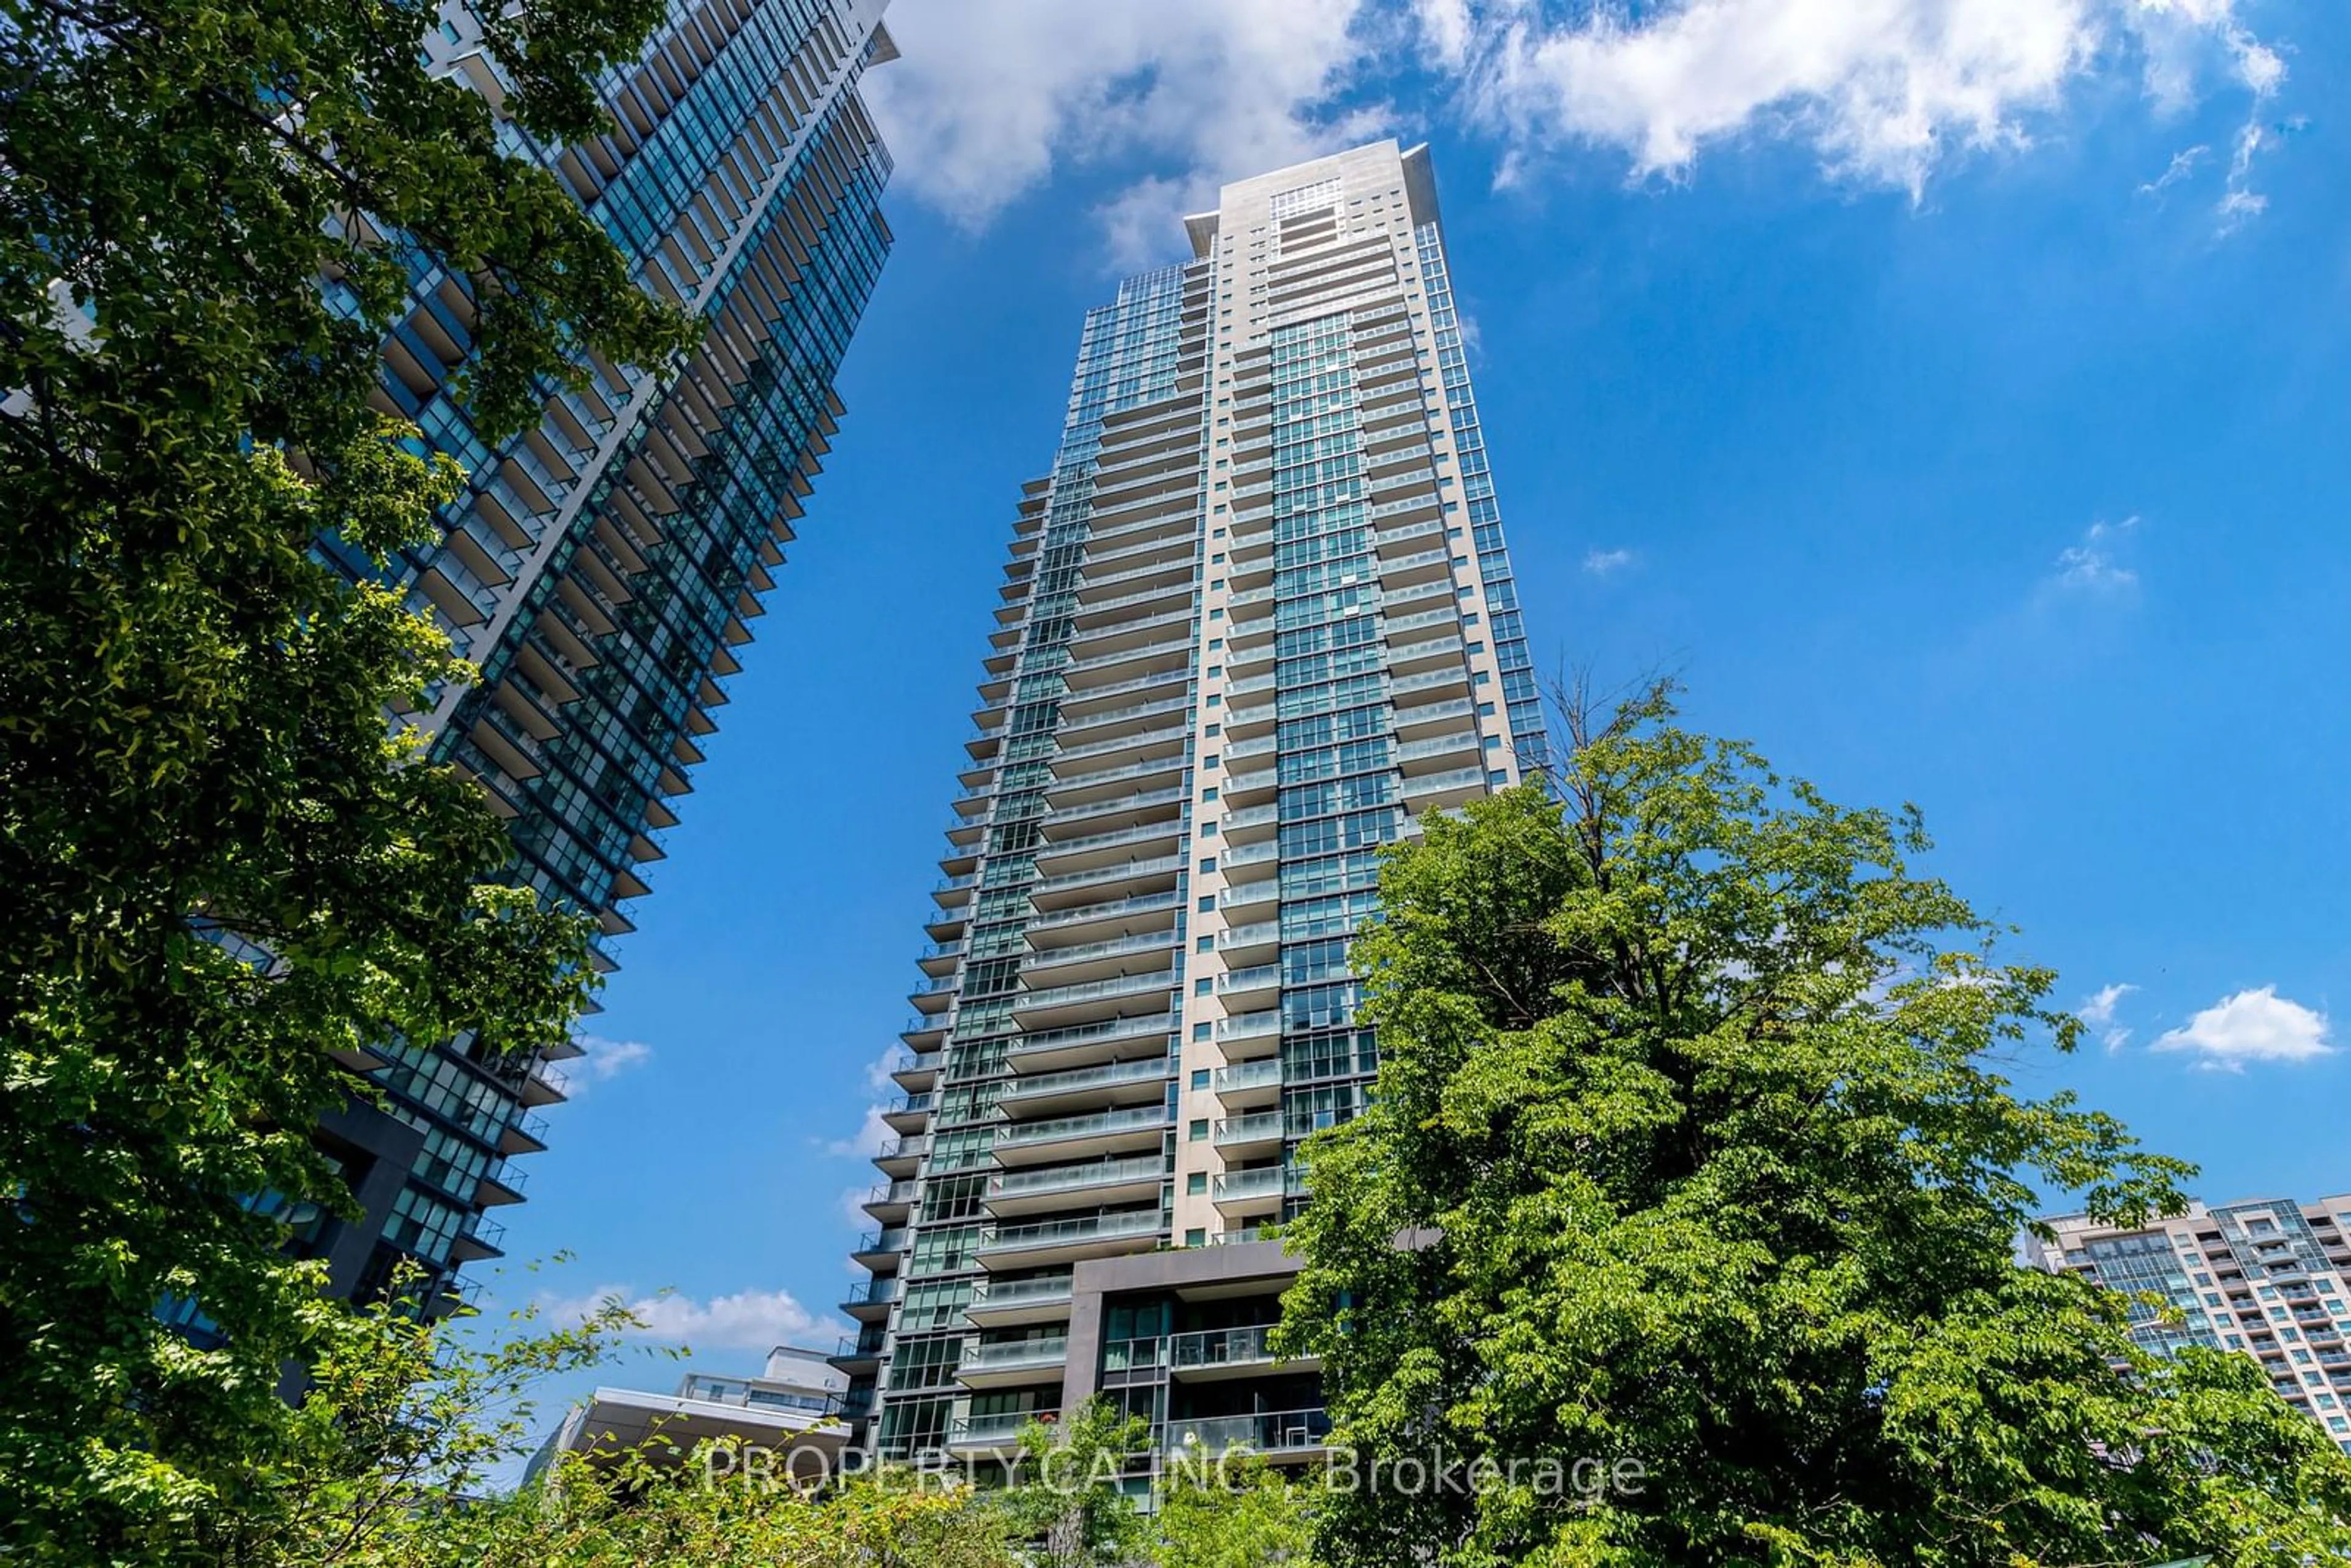 A pic from exterior of the house or condo for 5168 Yonge St #1501, Toronto Ontario M2N 0G1